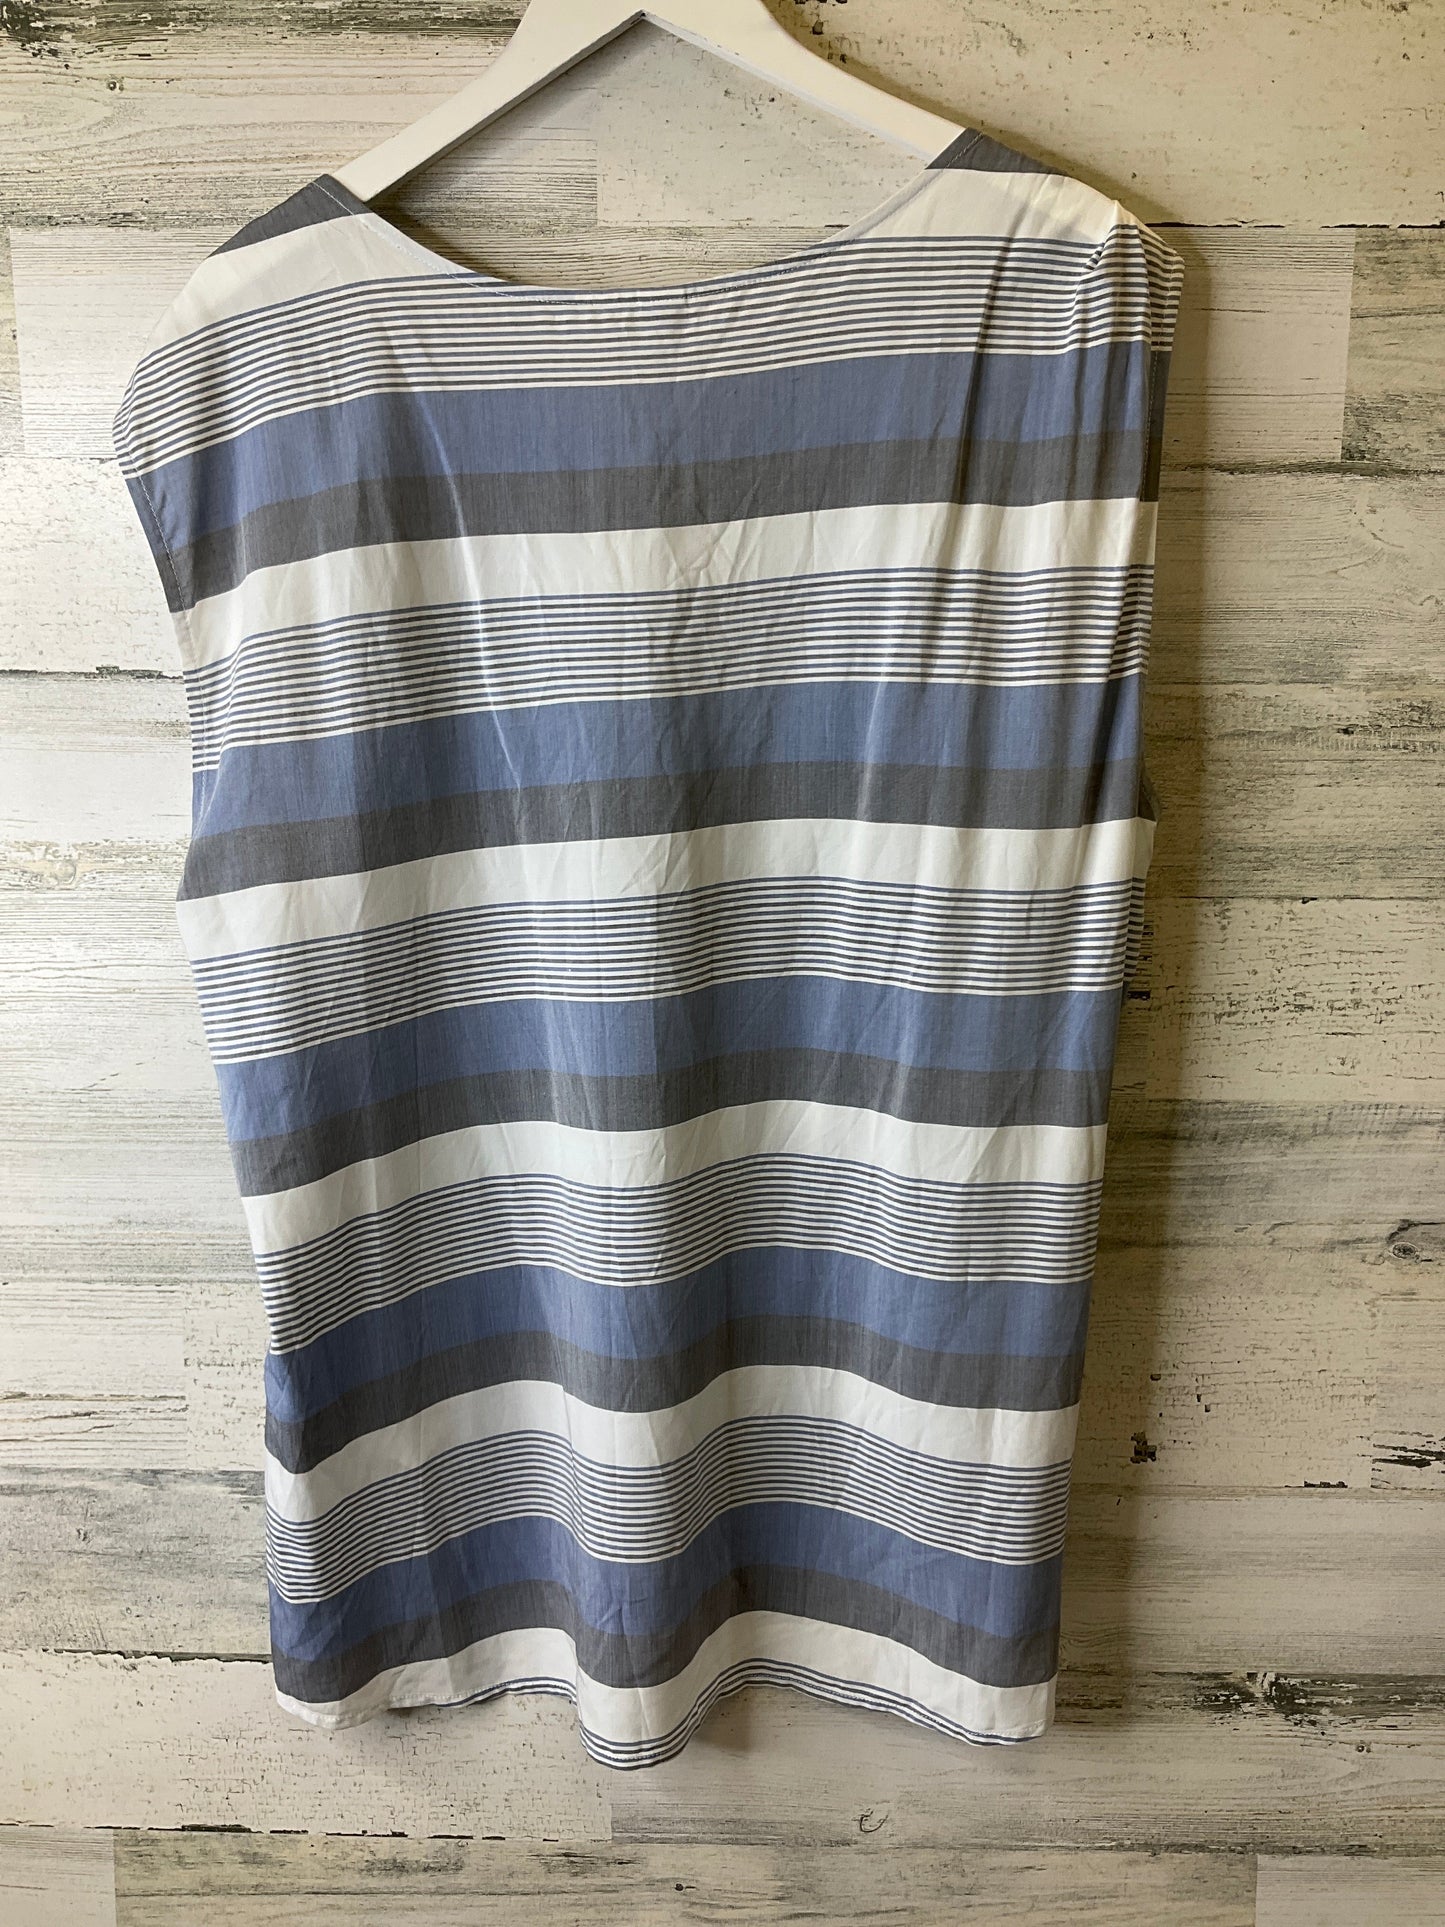 Top Sleeveless By Old Navy  Size: Xl